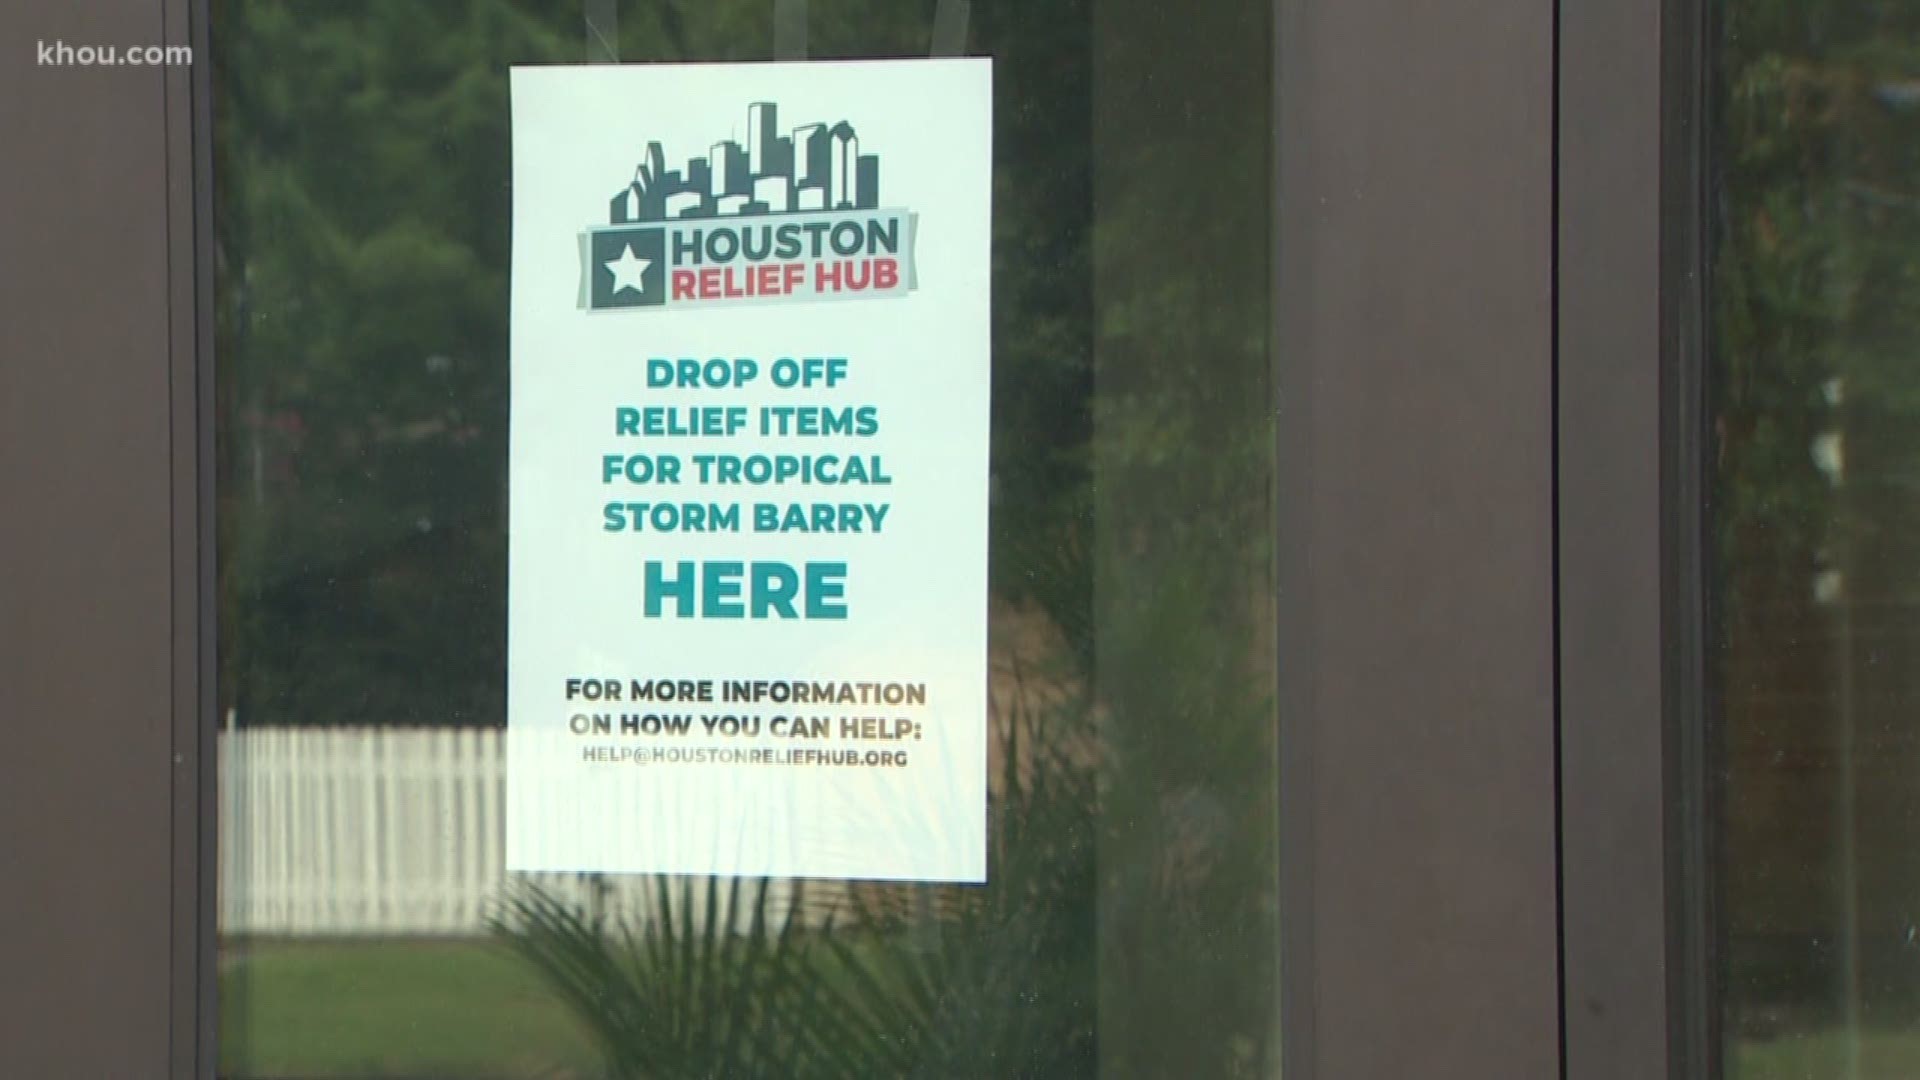 We don’t know yet the extent of what Tropical Storm Barry’s damage will be, but Houstonians are already stepping up to help: Houston Relief Hub has now activated their donation center.